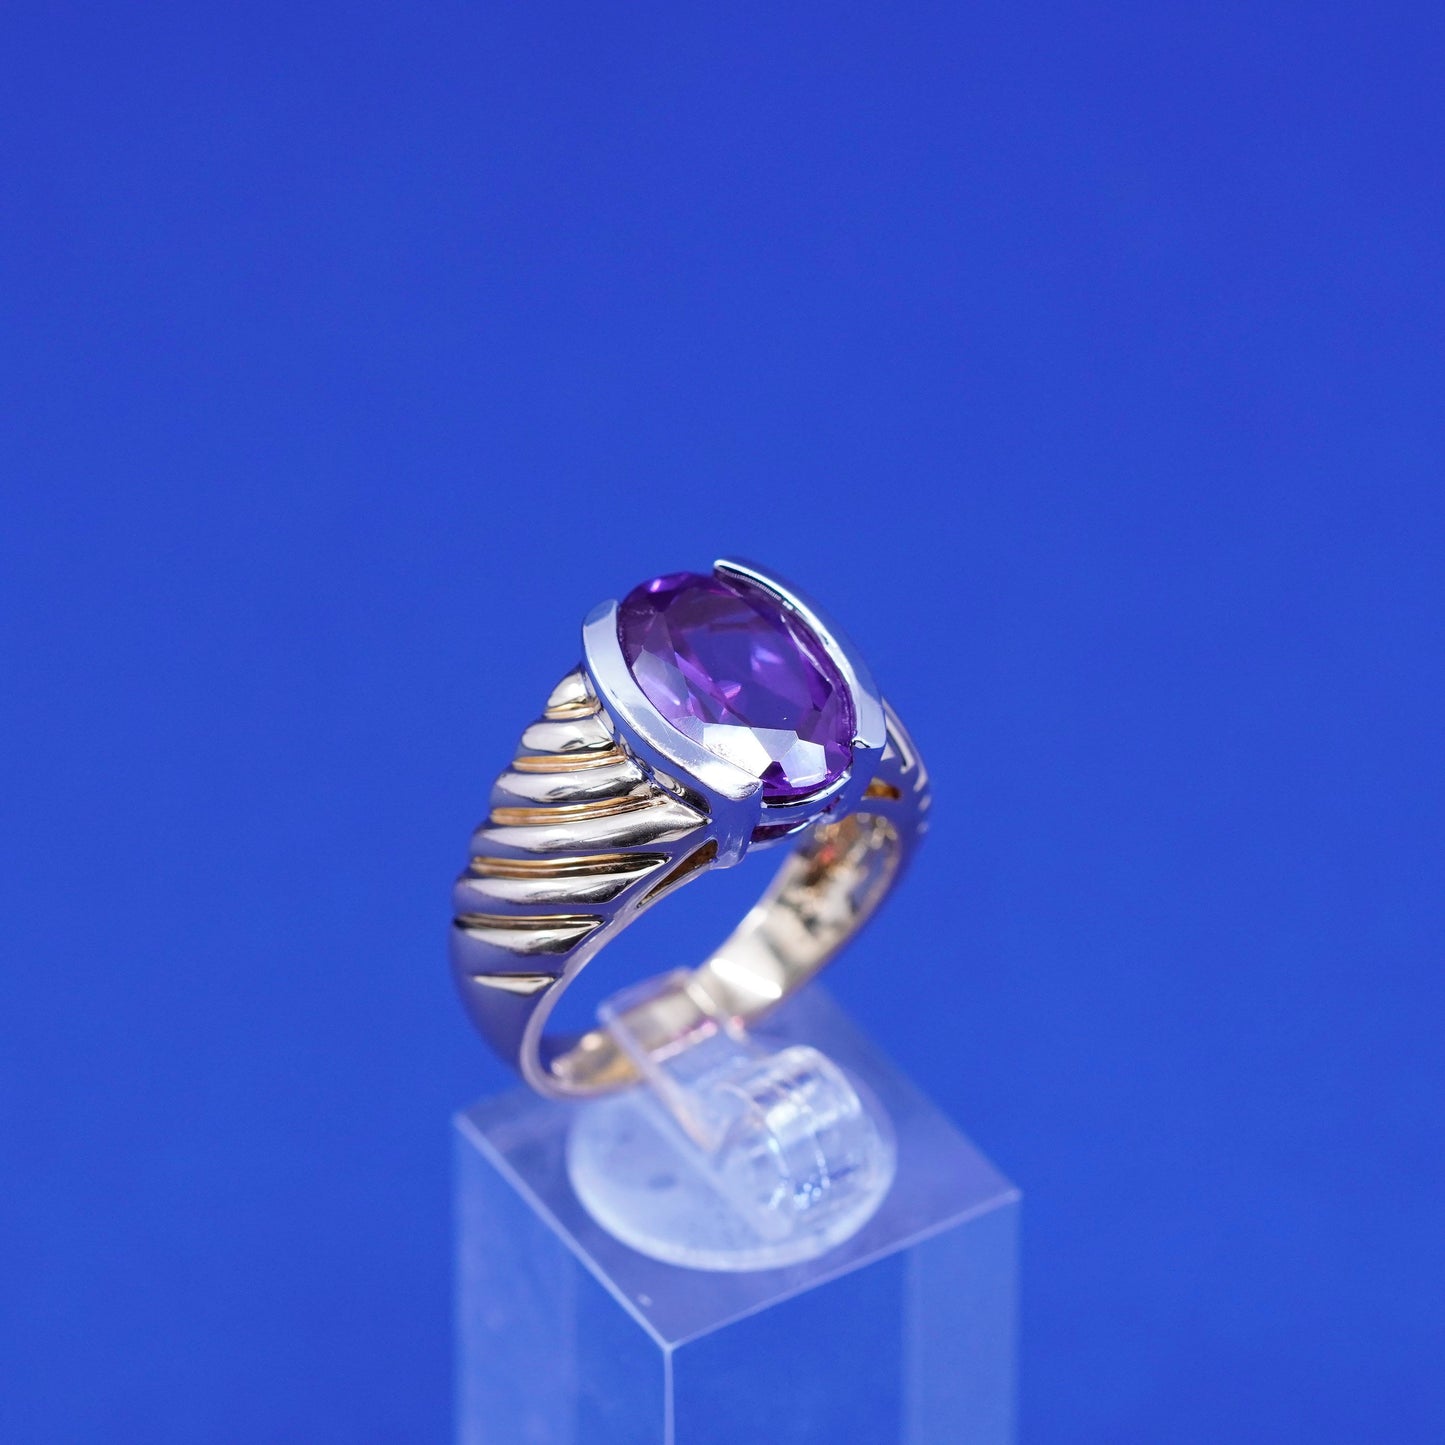 Size 10, vermeil gold over sterling 925 silver ribbed ring w/ oval amethyst